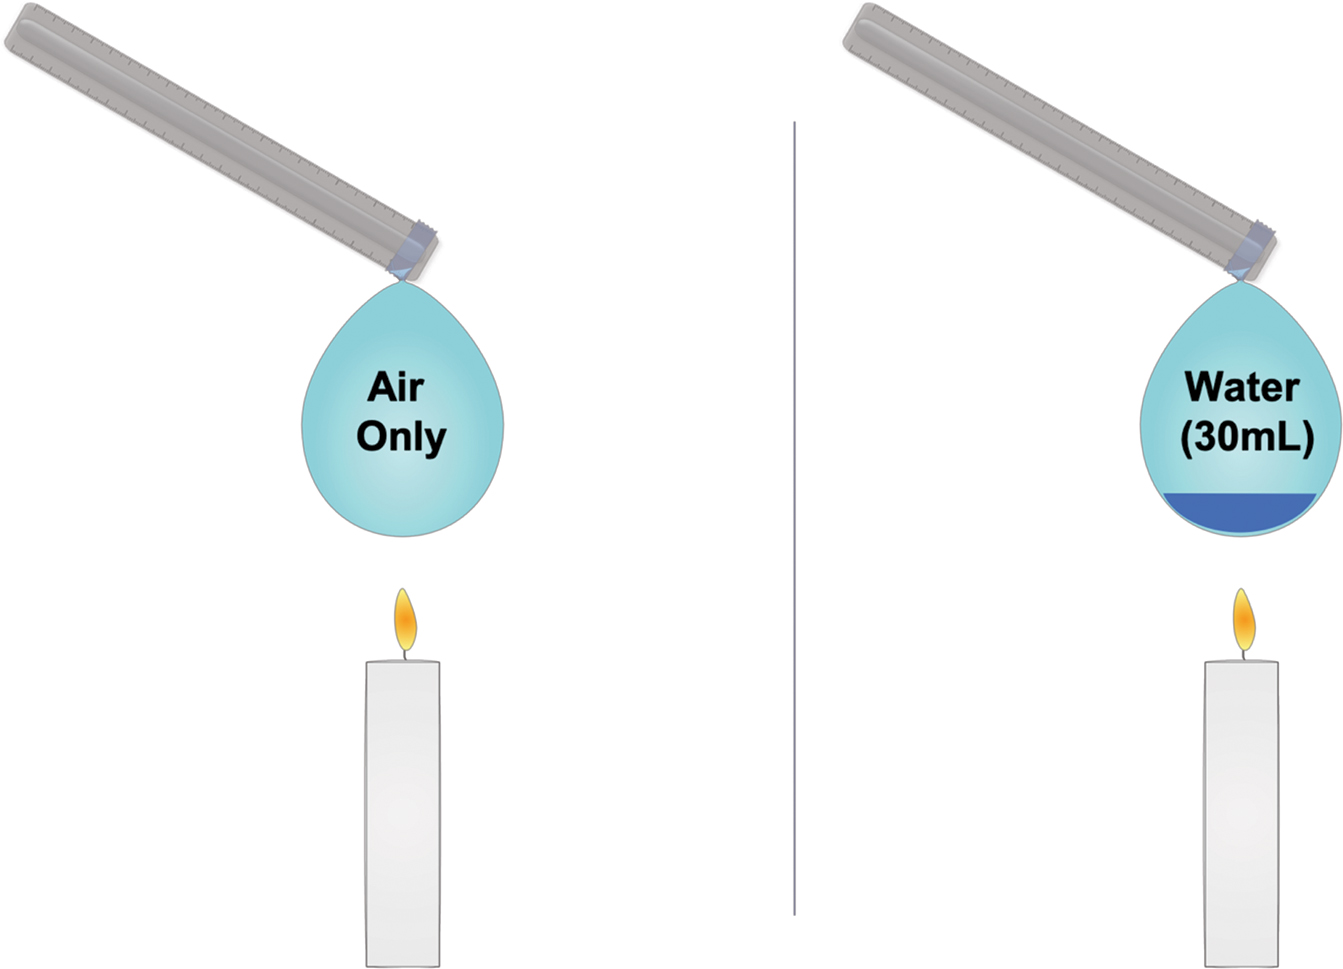 Equal size balloons, one containing only air and one containing 30 ml (1 oz.) of water.